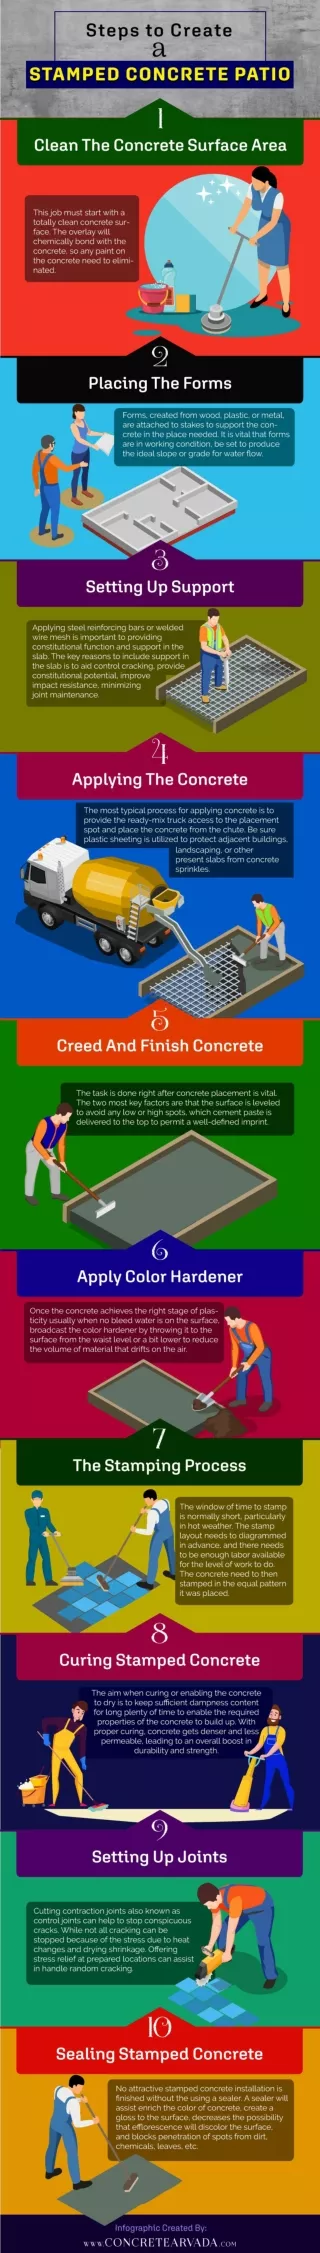 Steps to Create A Stamped Concrete Patio [Infographic]